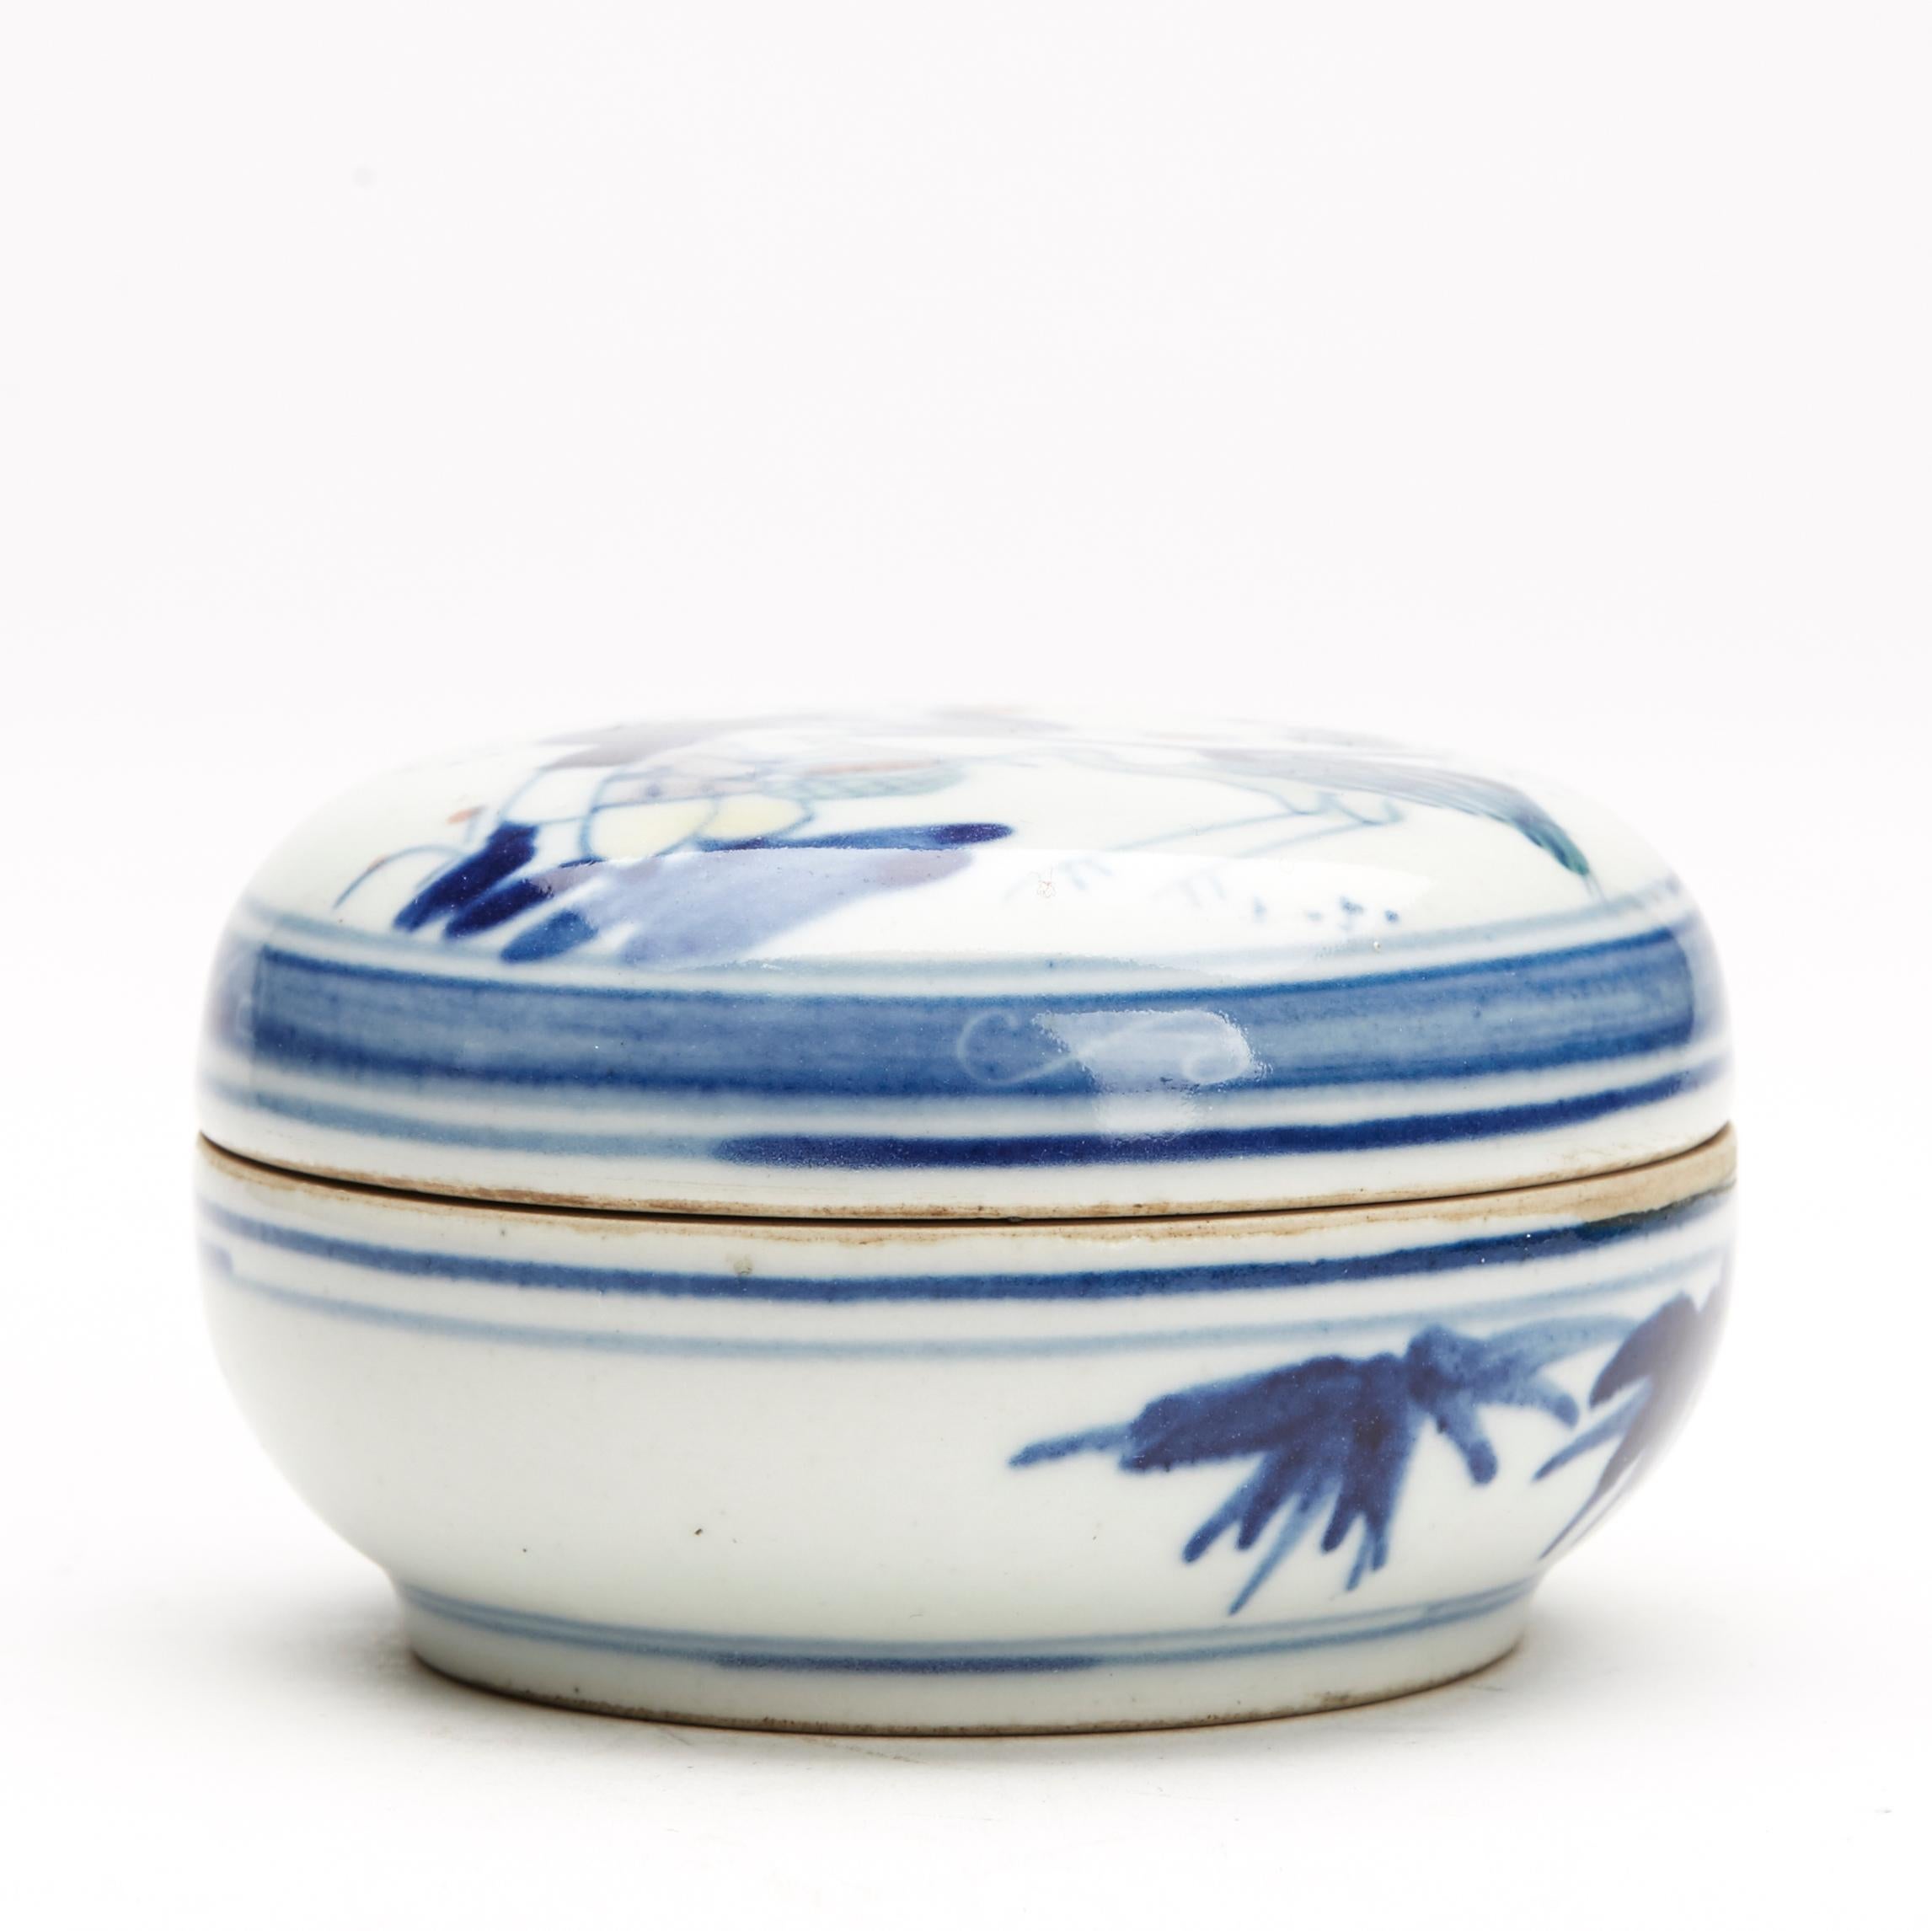 A Chinese porcelain lidded box of rounded form decorated with a figural scene of a man and child, the child feeding a bird decorated in Wucai glazes. The inner box has a further figural design and the box stands on an unglazed foot with unglazed